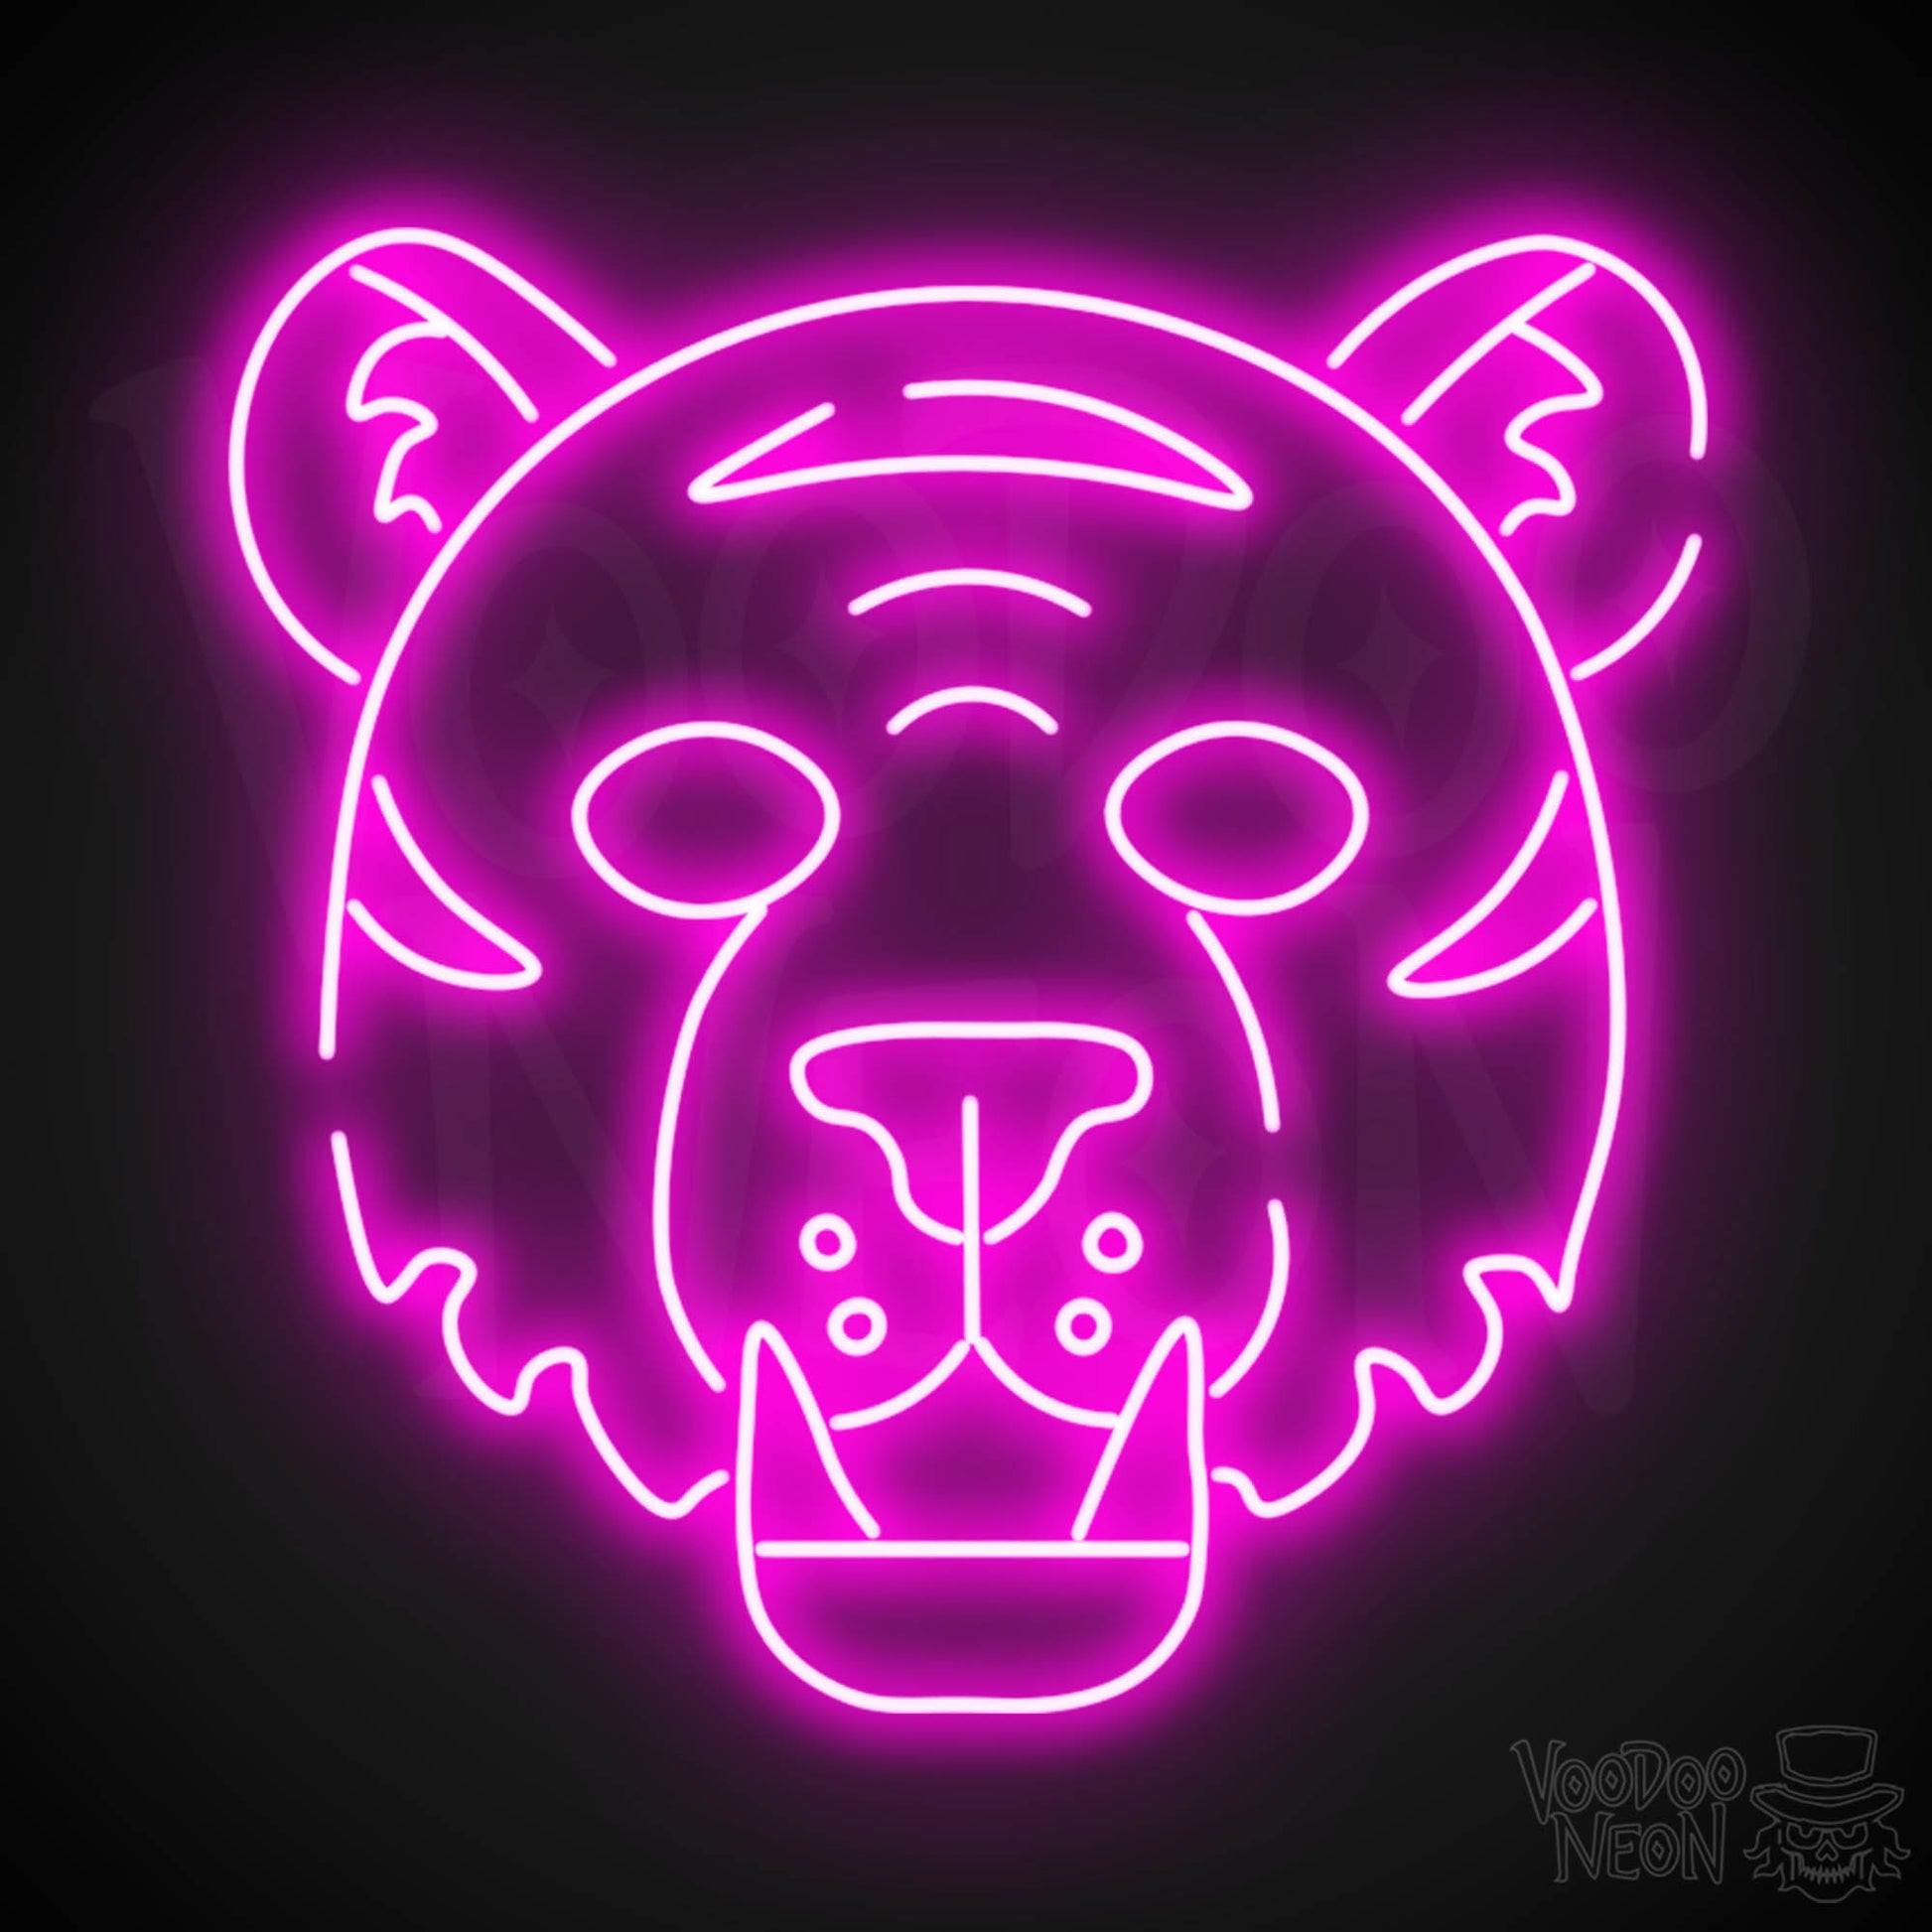 Neon Tiger Wall Art - Neon Tiger Sign - Tiger Neon Sign - LED Sign - Color Pink